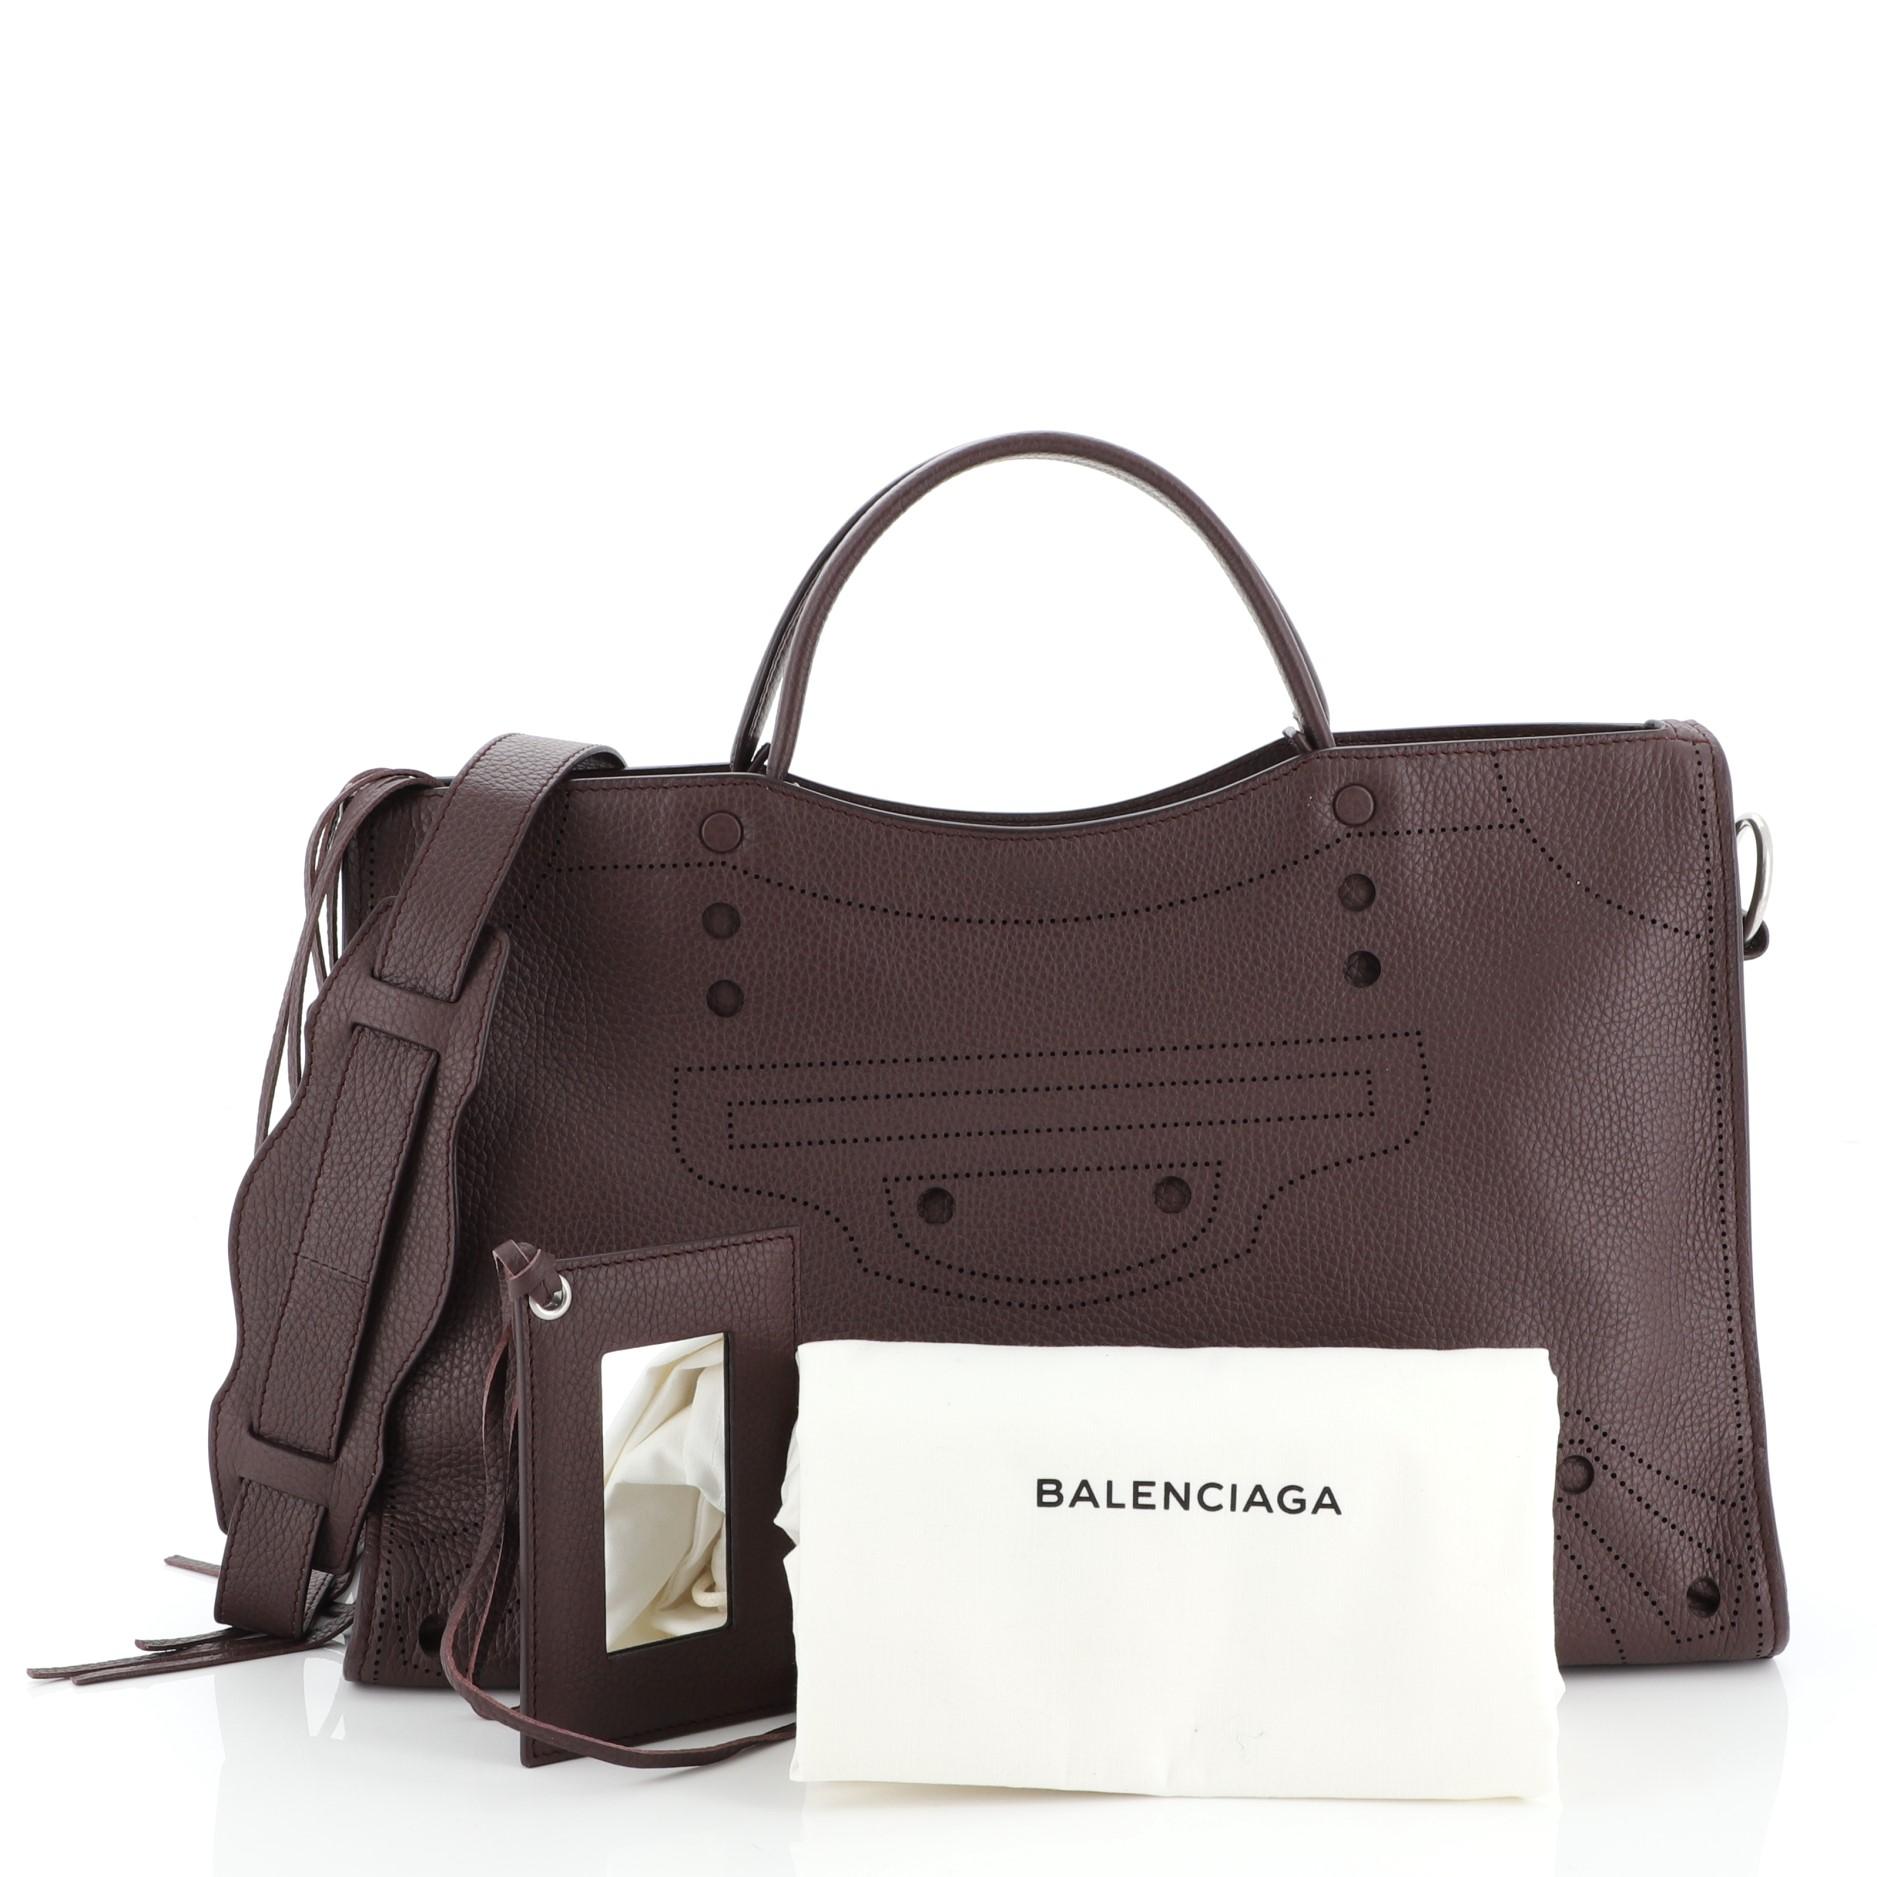 This Balenciaga Blackout City Bag Leather Medium, crafted in purple leather, features dual leather handles and matte silver-tone hardware. Its zip closure opens to a purple leather and suede interior with zip and snap pockets. 

Estimated Retail